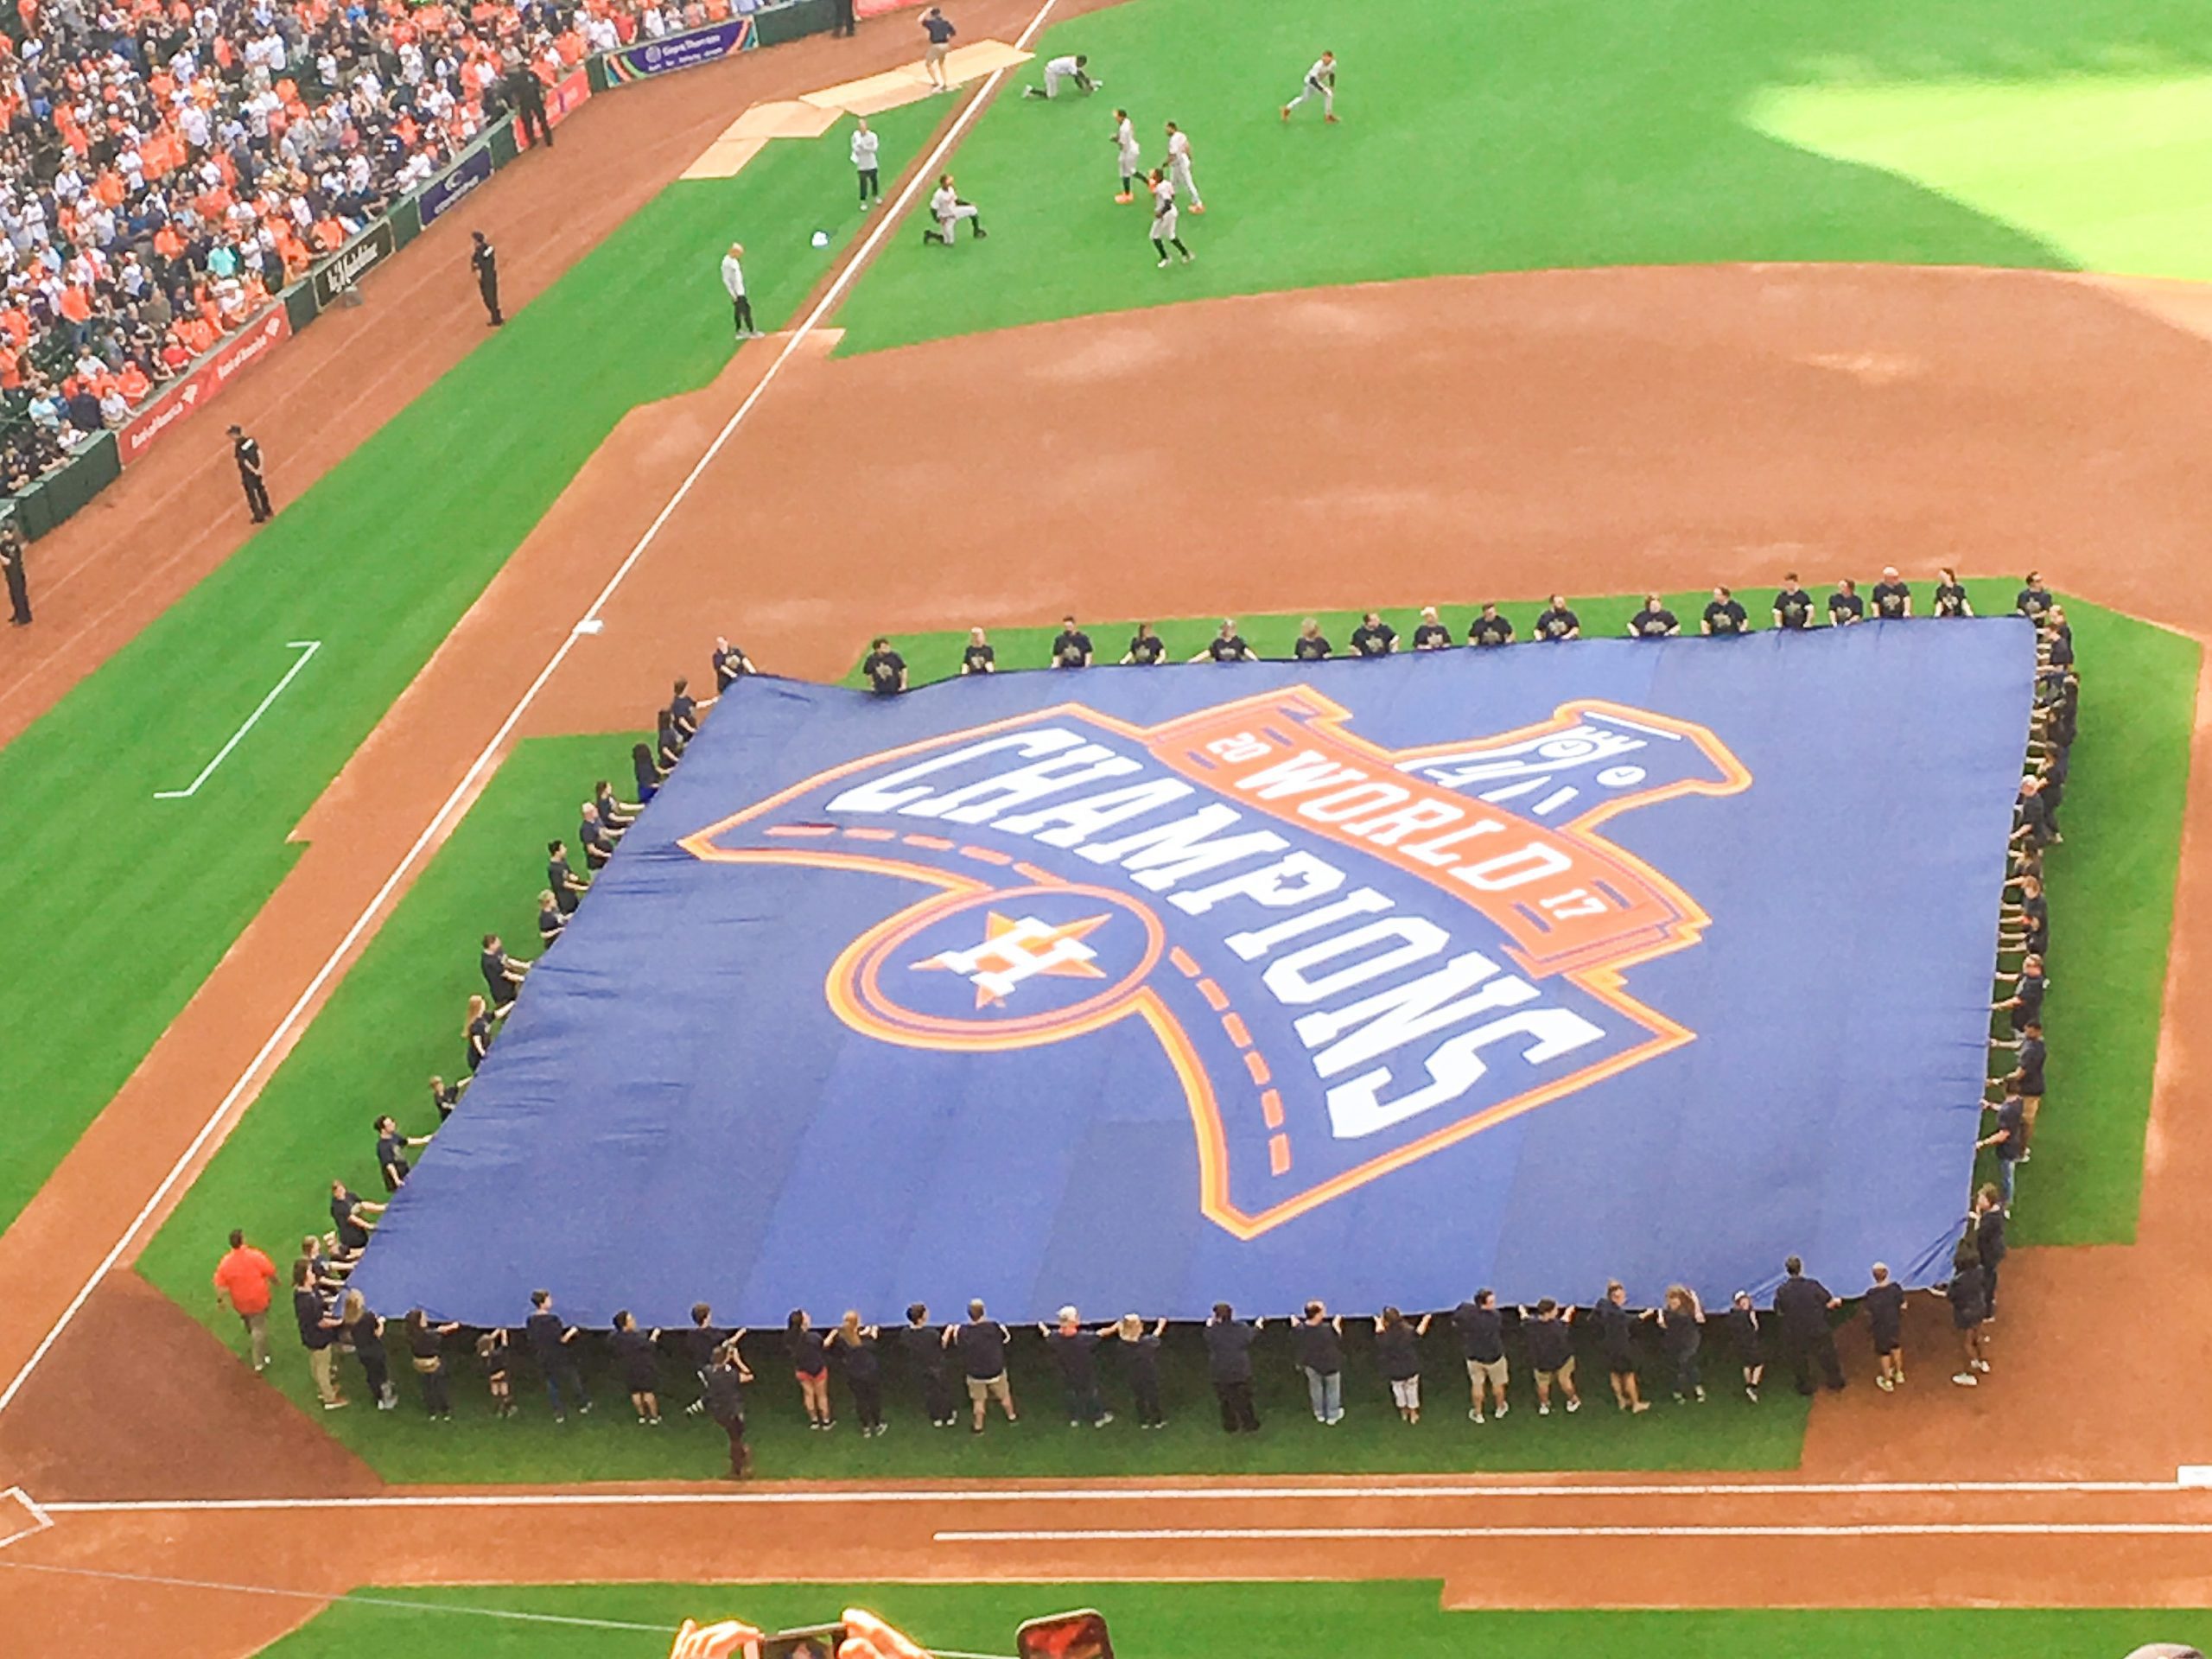 view of world champions banner on baseball field